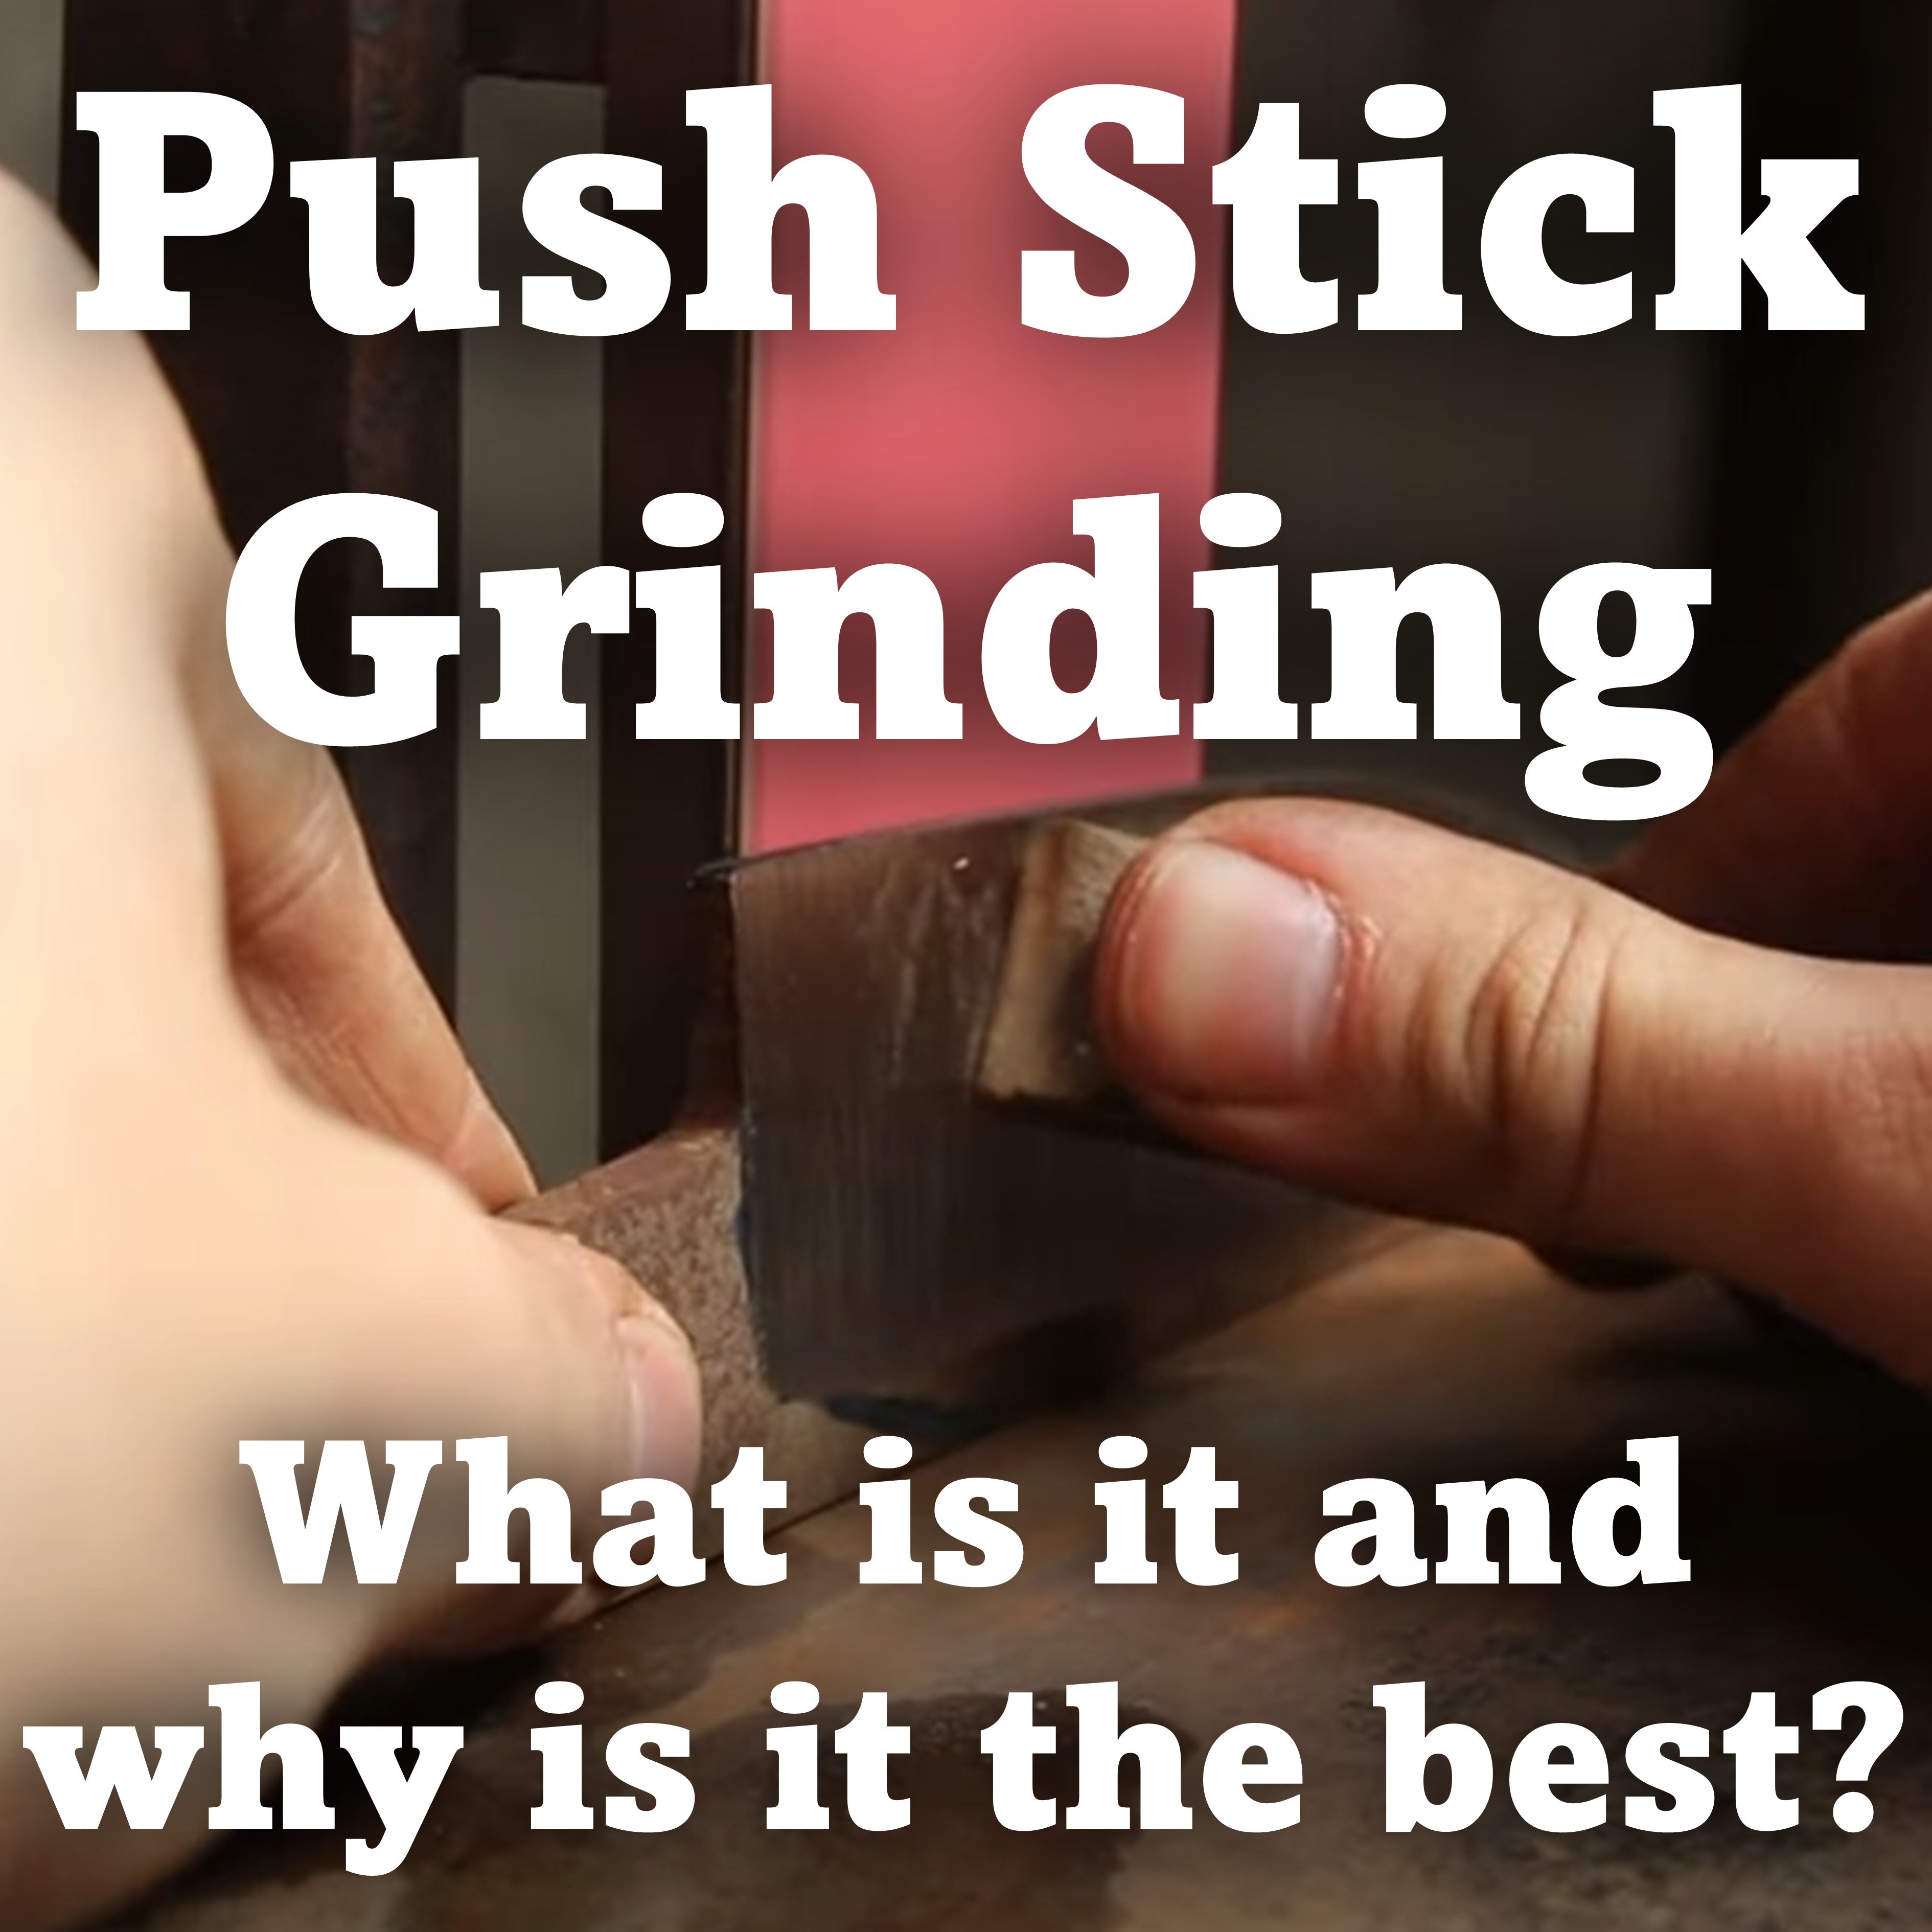 What is push stick grinding and why is it the best?